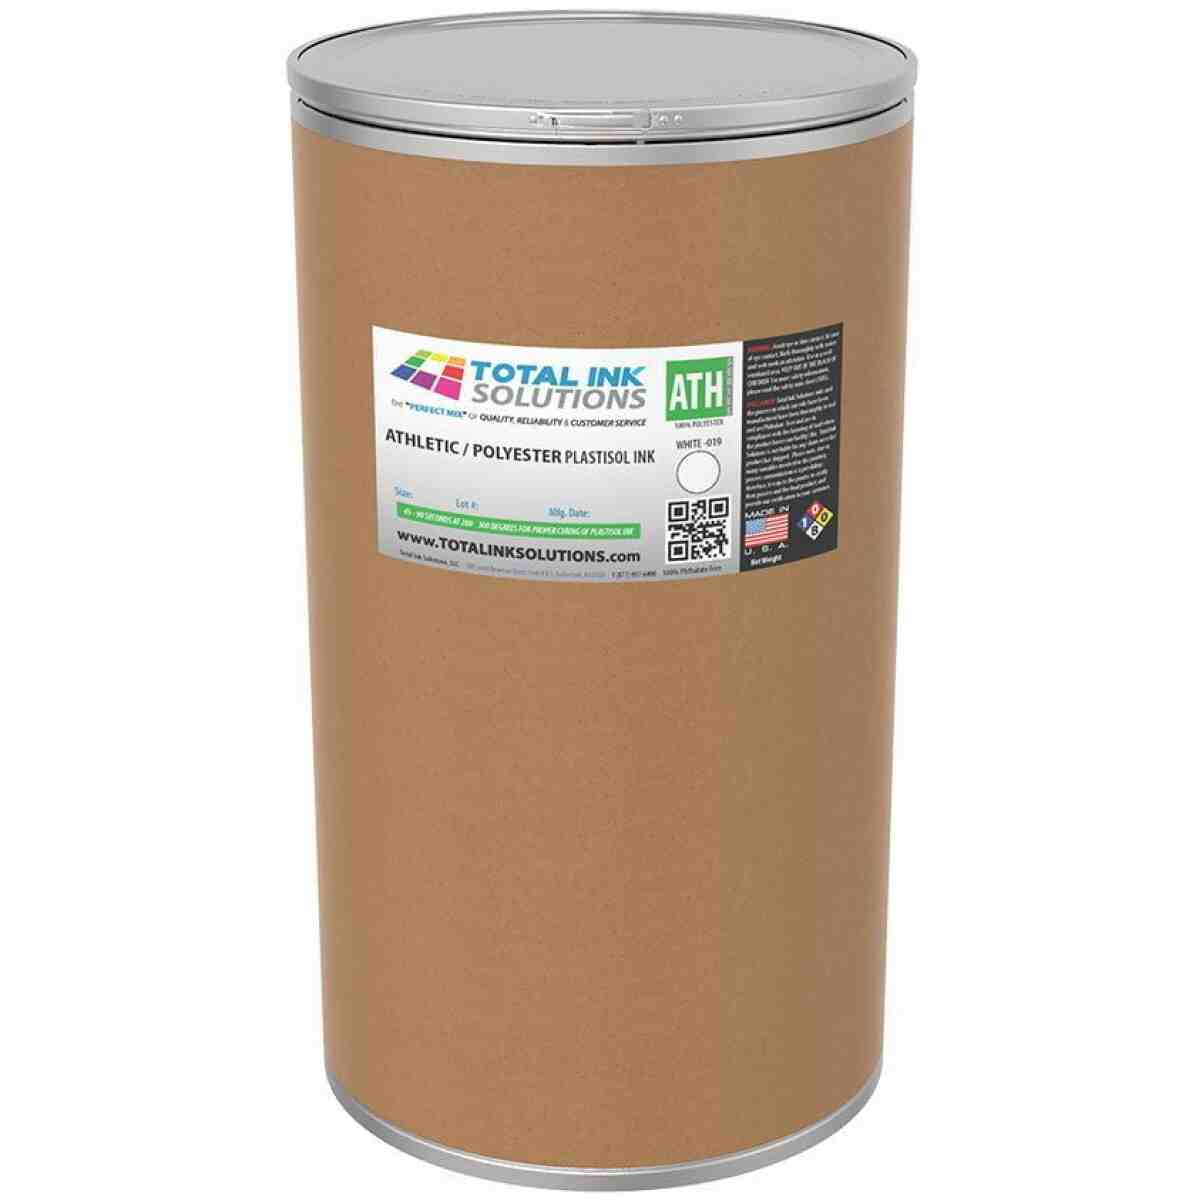 Athletic 100% Polyester Plastisol Ink - White - 55 Gallons TOTAL INK SOLUTIONS®